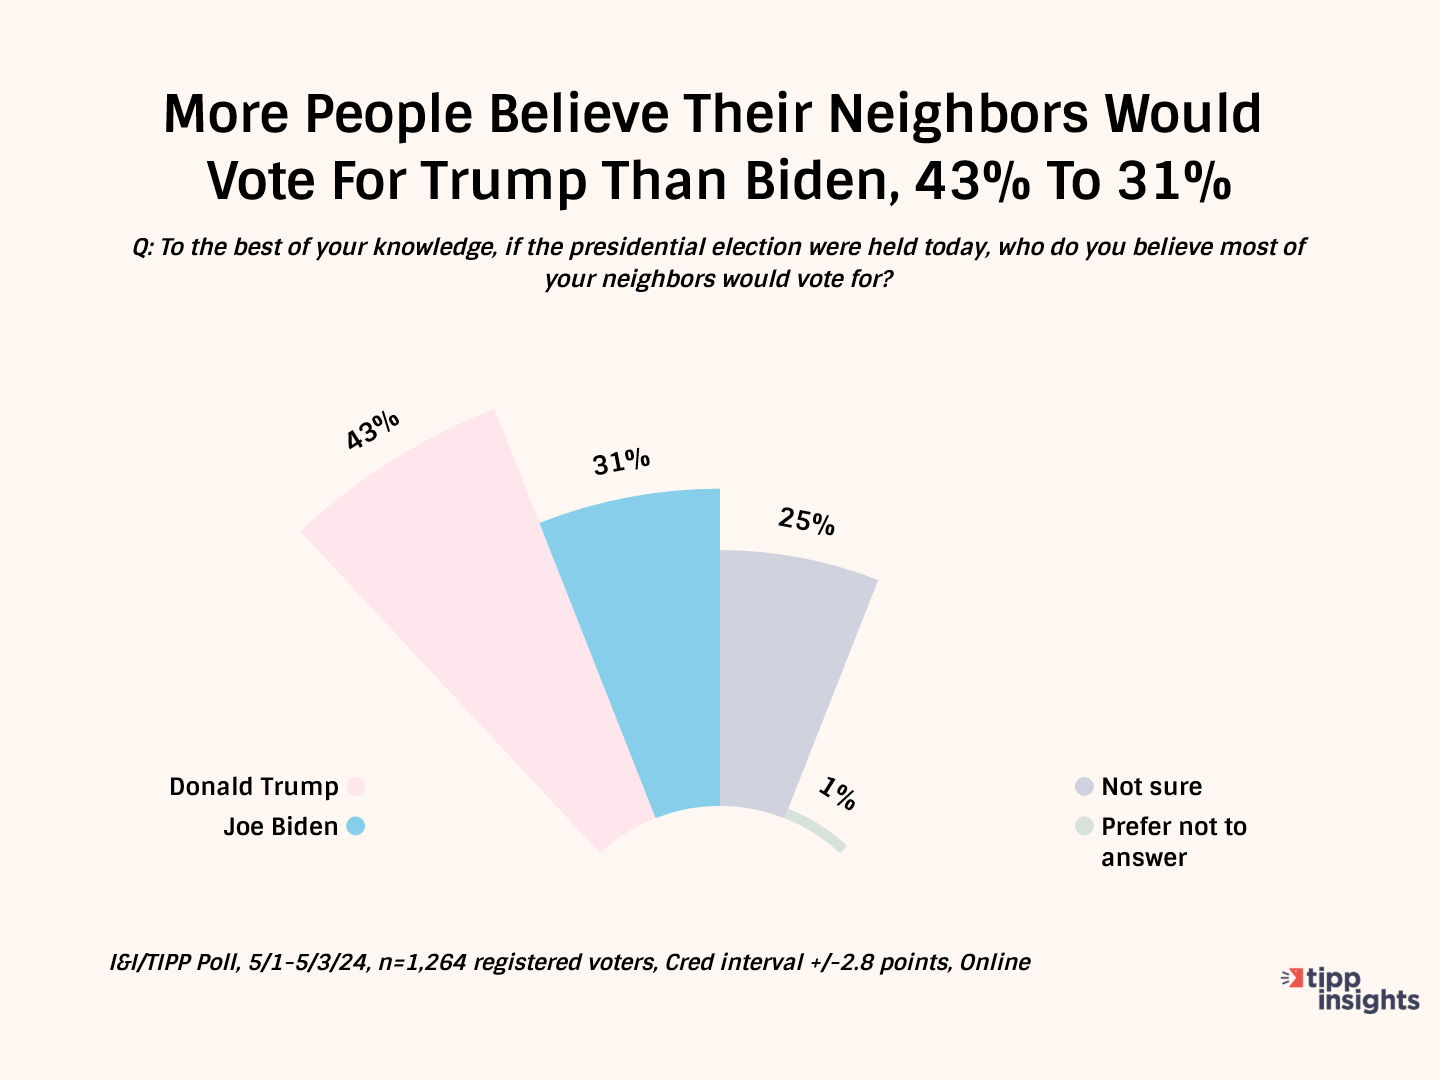 Biden And Trump Neck-And Neck, But Most Americans Think Trump Will Win: I&I/TIPP Poll